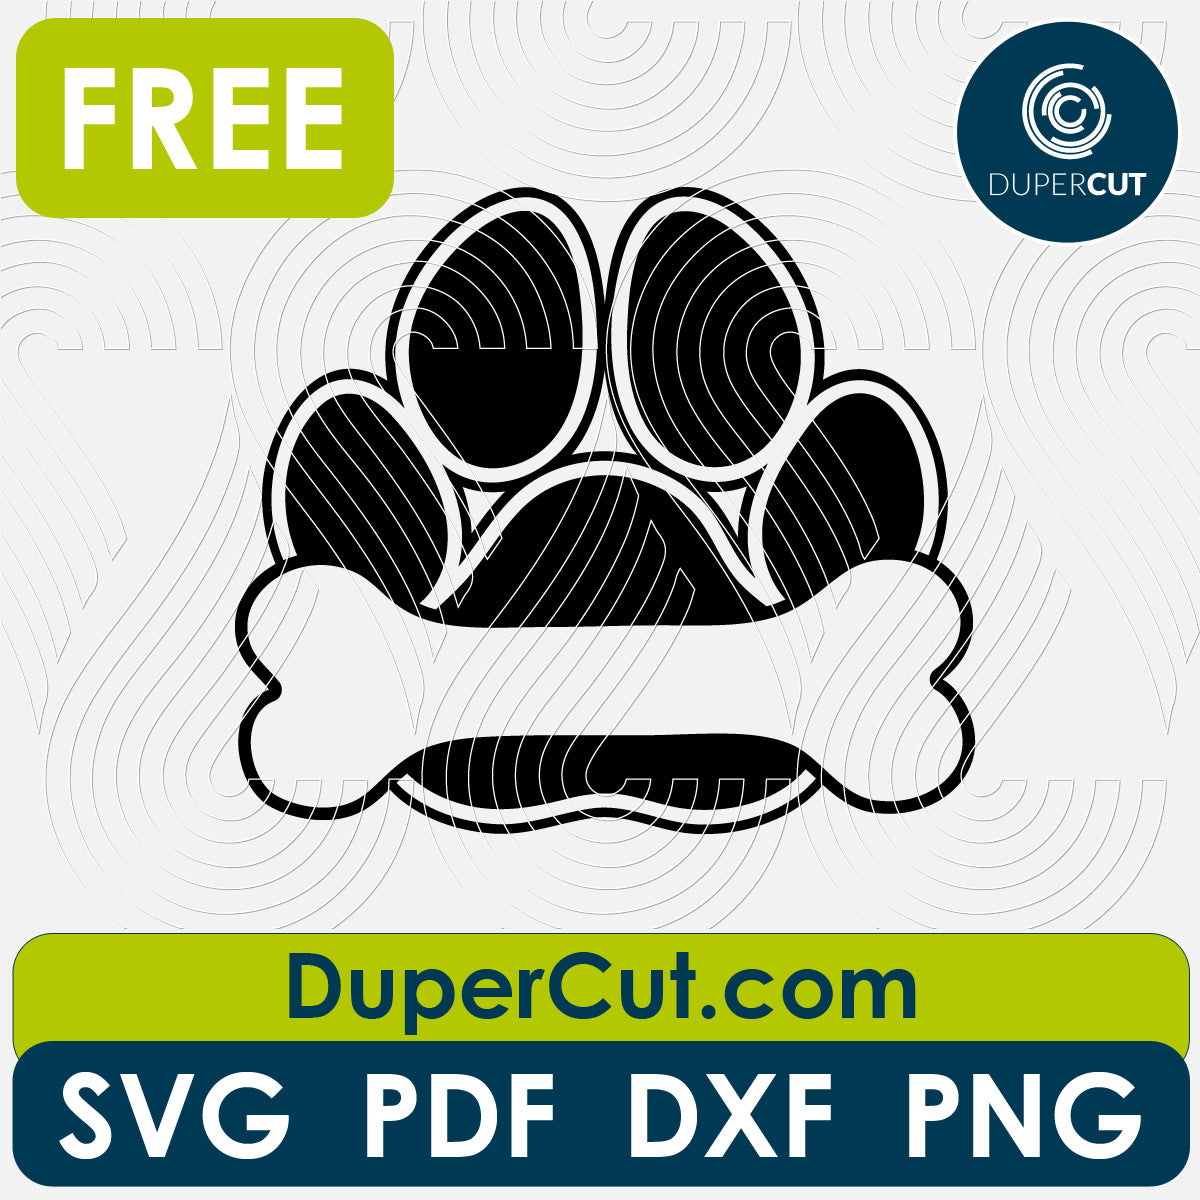 Dog's paw print with bone - free SVG PNG DXF vector files for laser and blade cutting machines. Glowforge, Cricut, Silhouette cameo templates by www.DuperCut.com